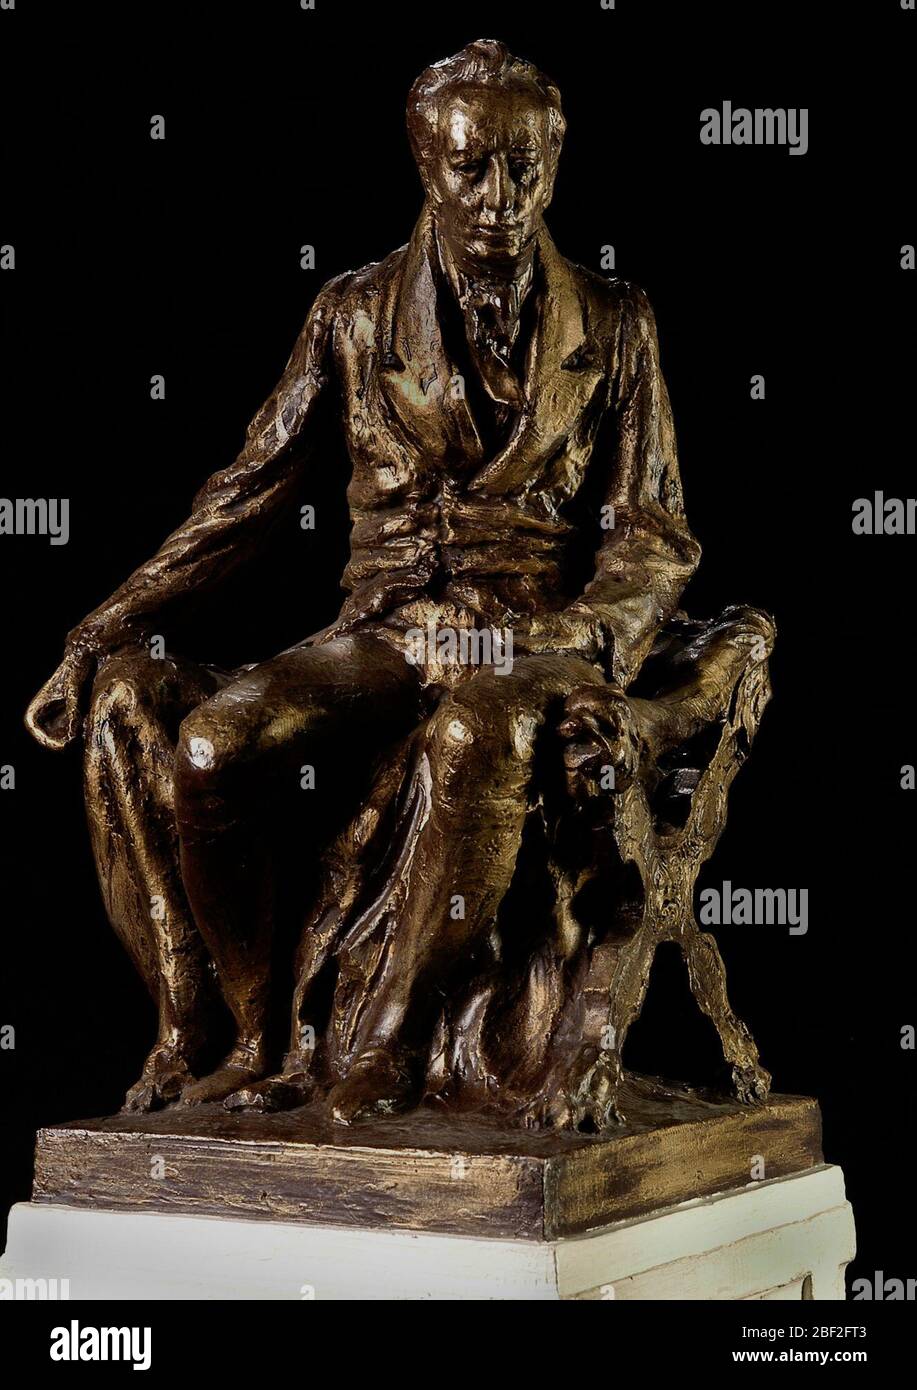 Model for Seated Statue of James Smithson. In December 1903, Alexander Graham Bell, a regent of the Smithsonian Institution, asked Gutzon Borglum to submit plans for a memorial honoring the institution’s founder. Stock Photo